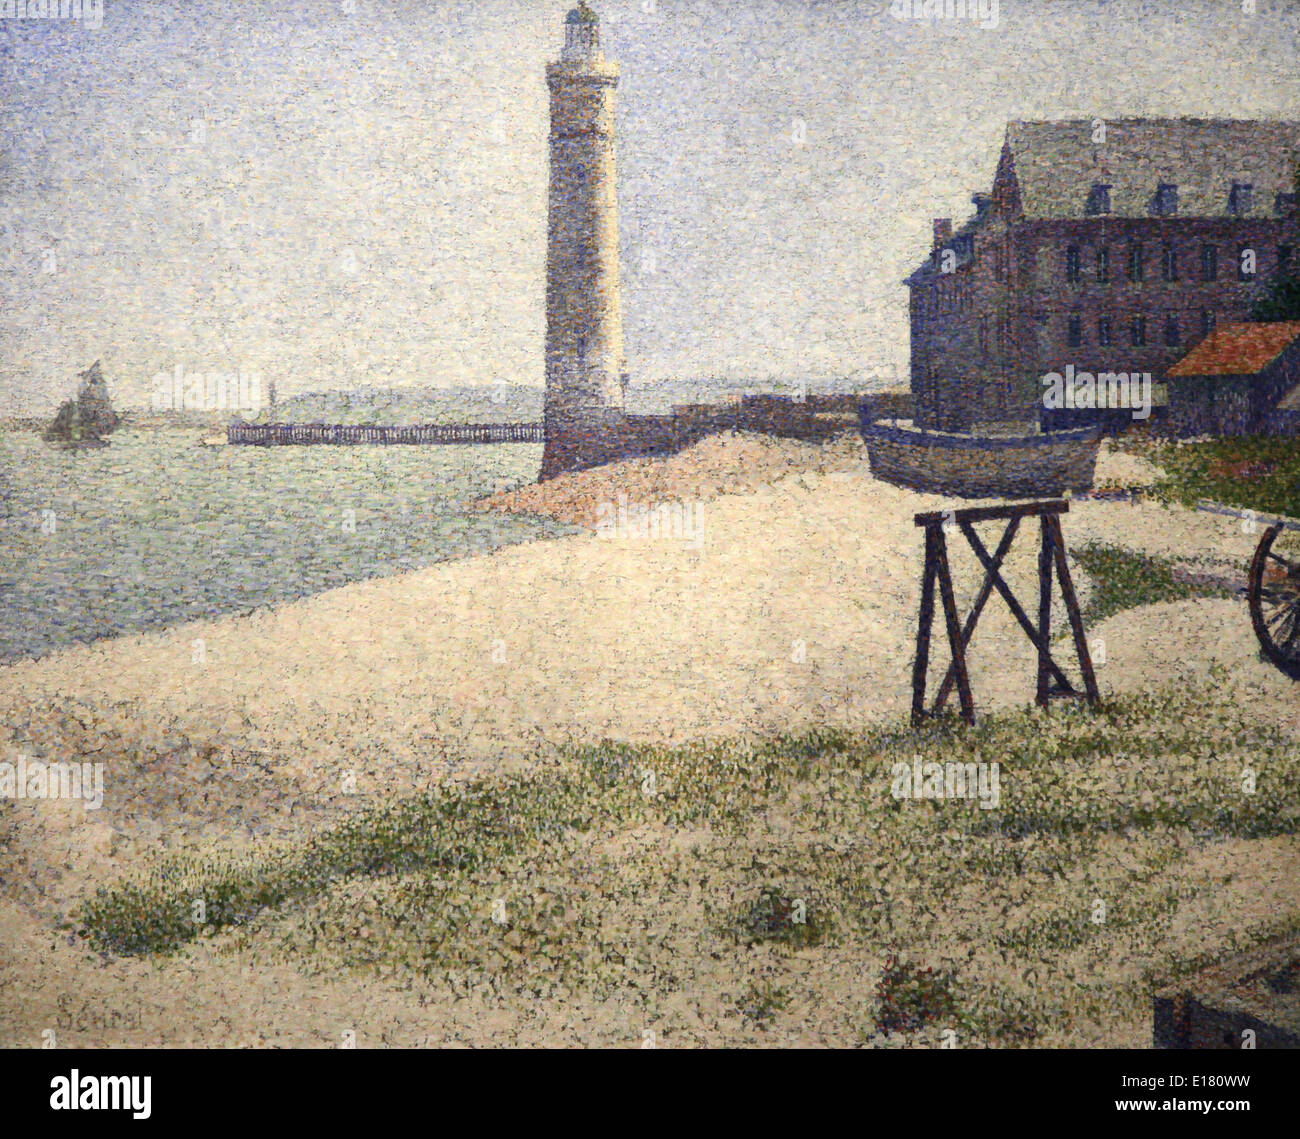 Georges-Pierre Seurat 1859-1891 was a French Post-Impressionist painter and draftsman.The Lighthouse at Honfleur George Seurat Stock Photo